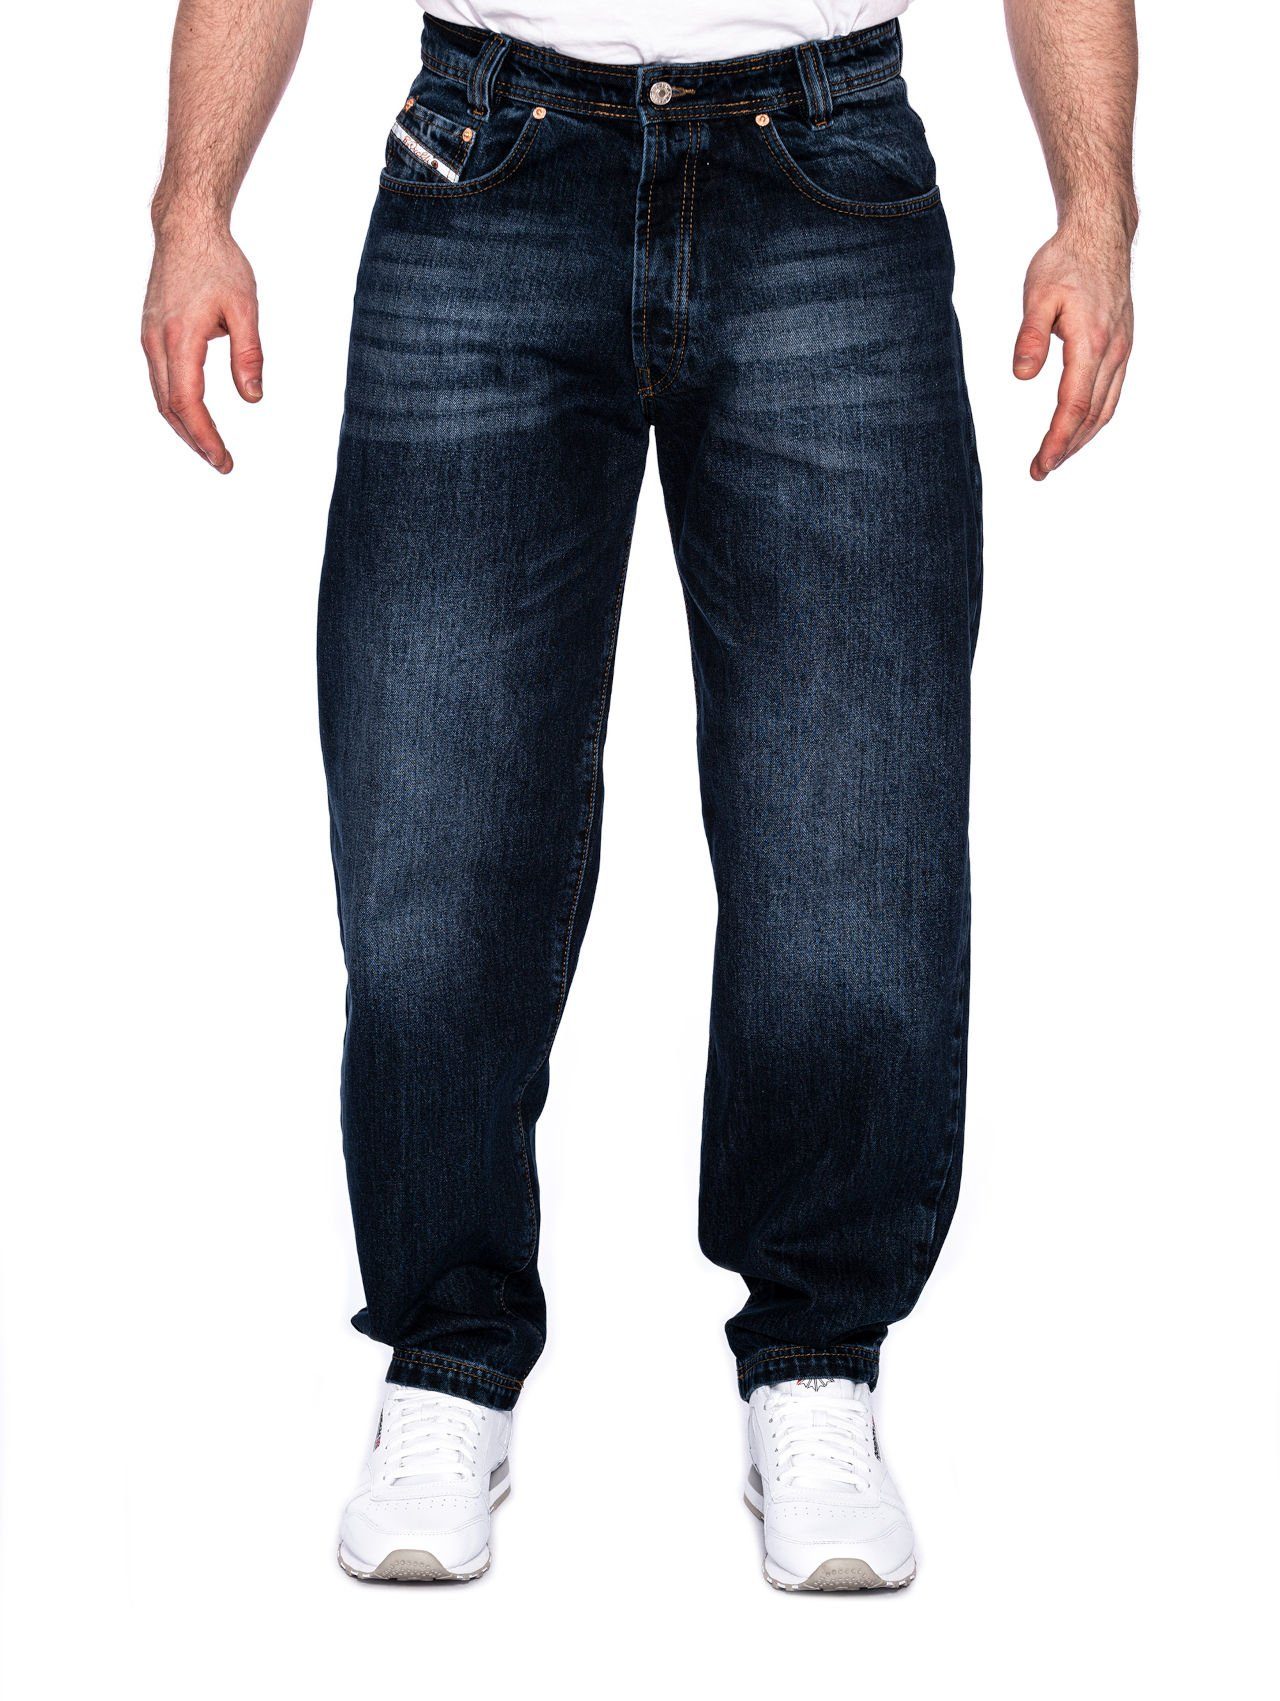 Pocket Fit, Five Loose Jeans PICALDI 471 Jeans Weite Zicco Jeans Hurricane